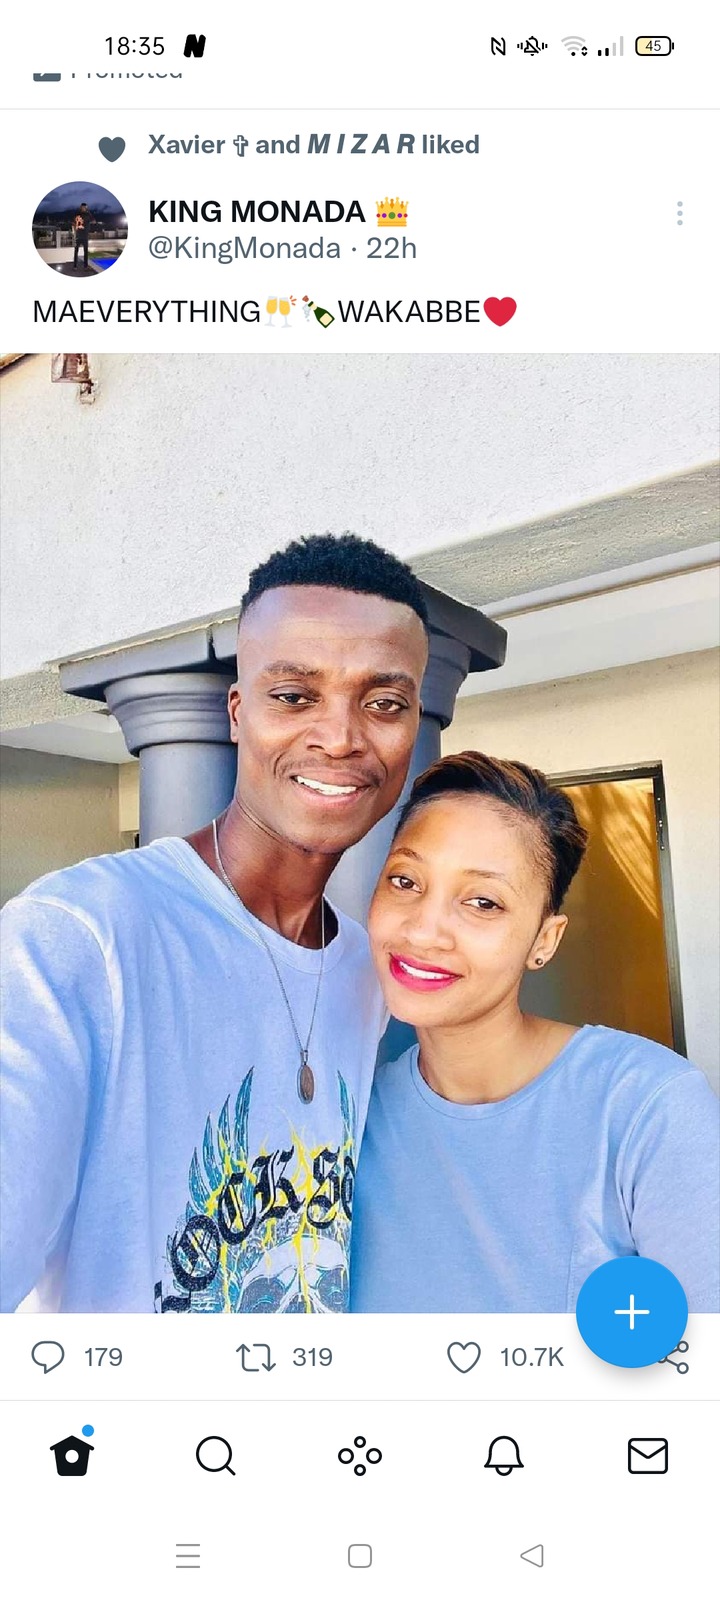 Check out King Monada picture with his second wife that caused a stir ...